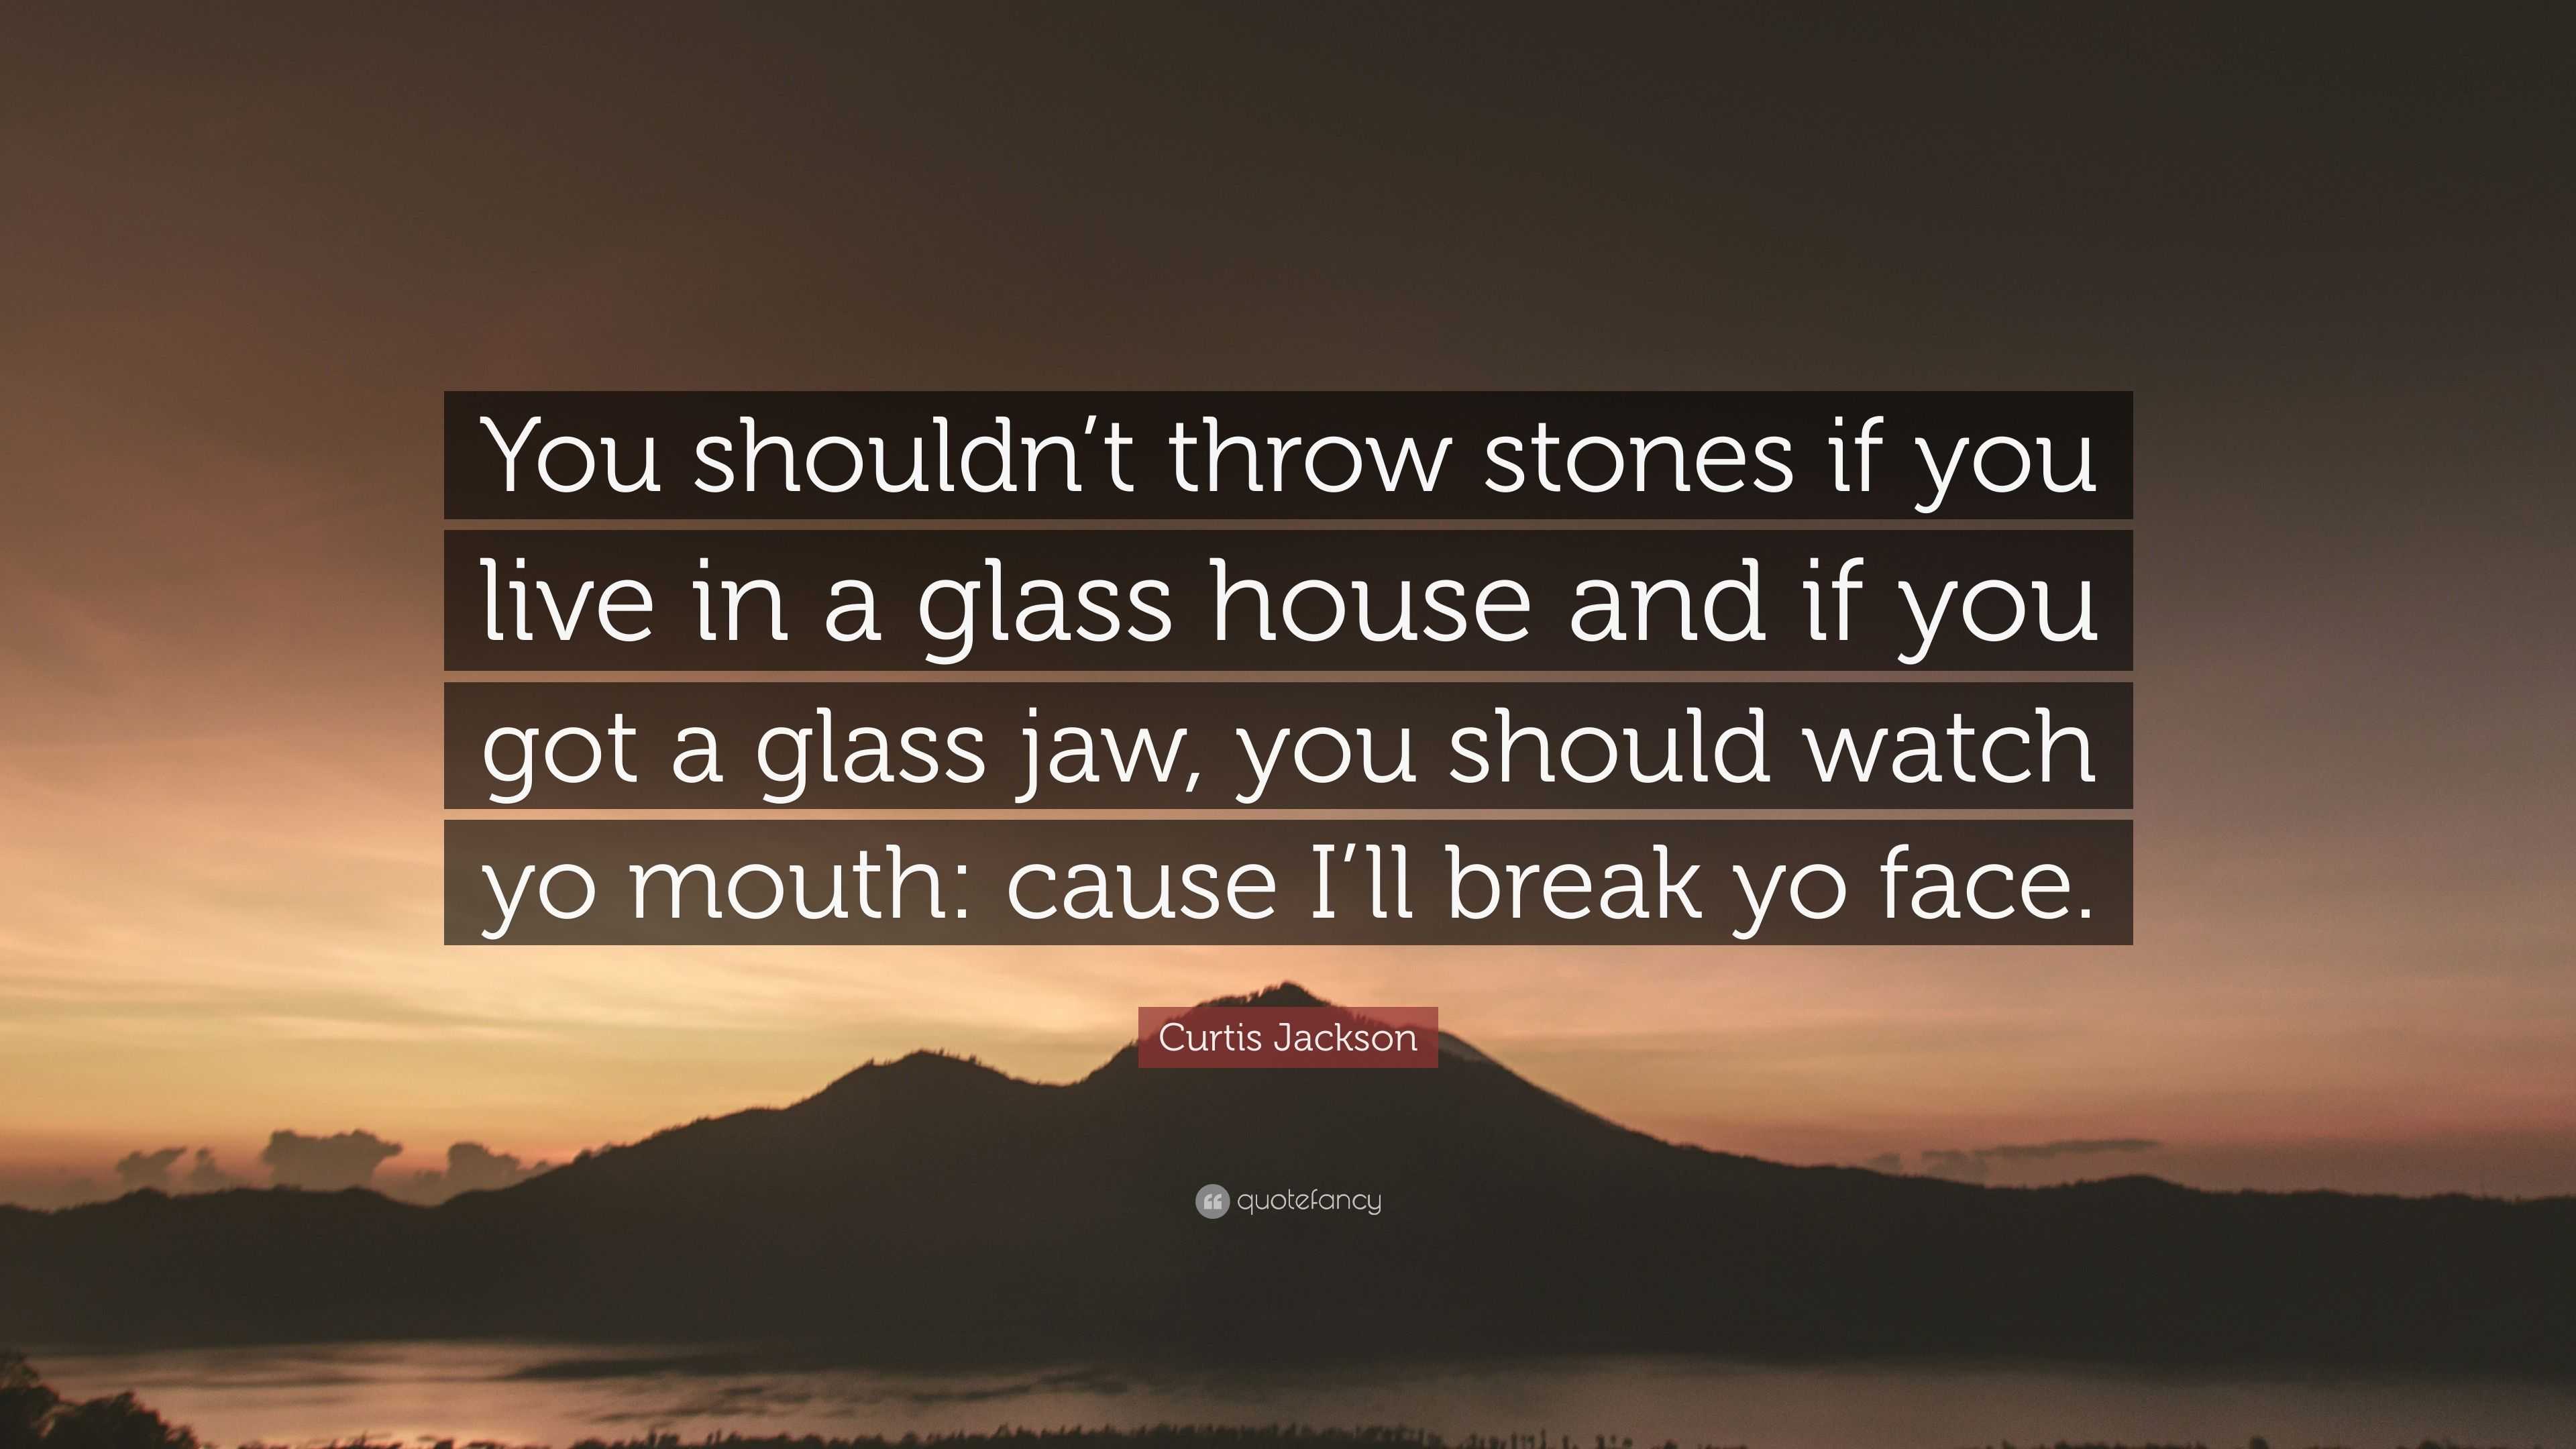 Curtis Jackson Quote “you Shouldn’t Throw Stones If You Live In A Glass House And If You Got A